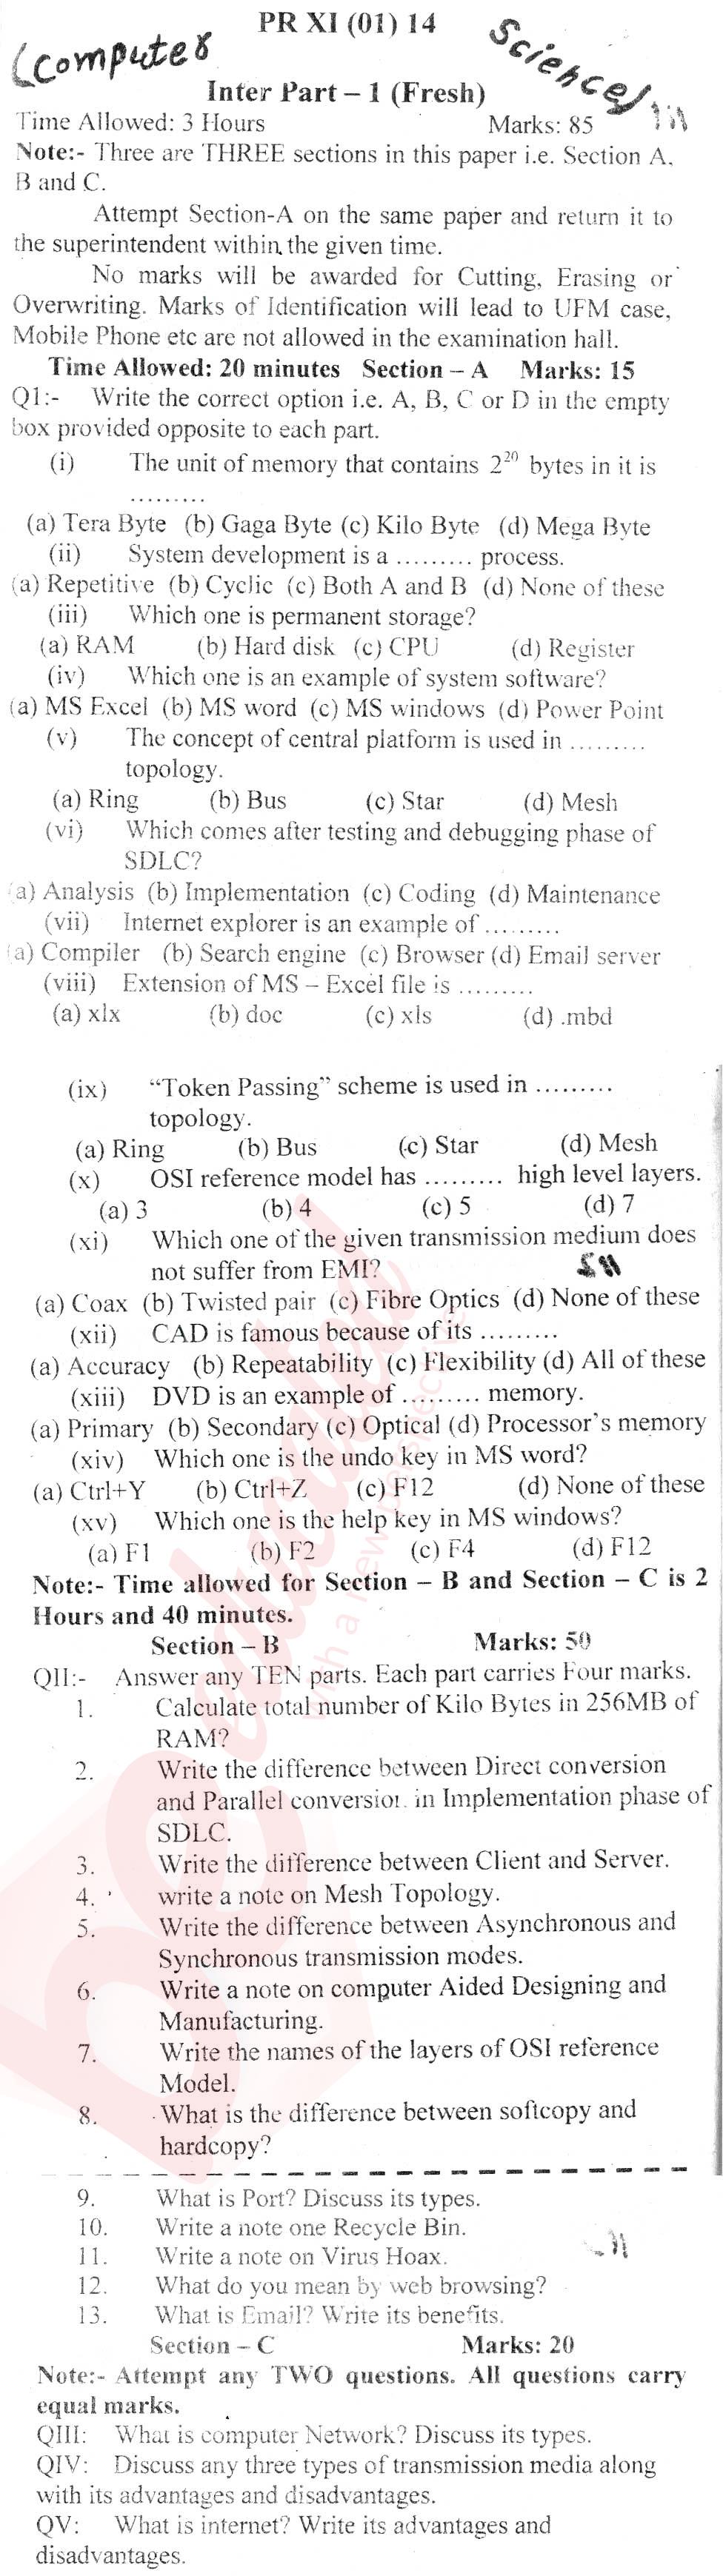 Computer Science ICS Part 1 Past Paper Group 1 BISE Abbottabad 2014